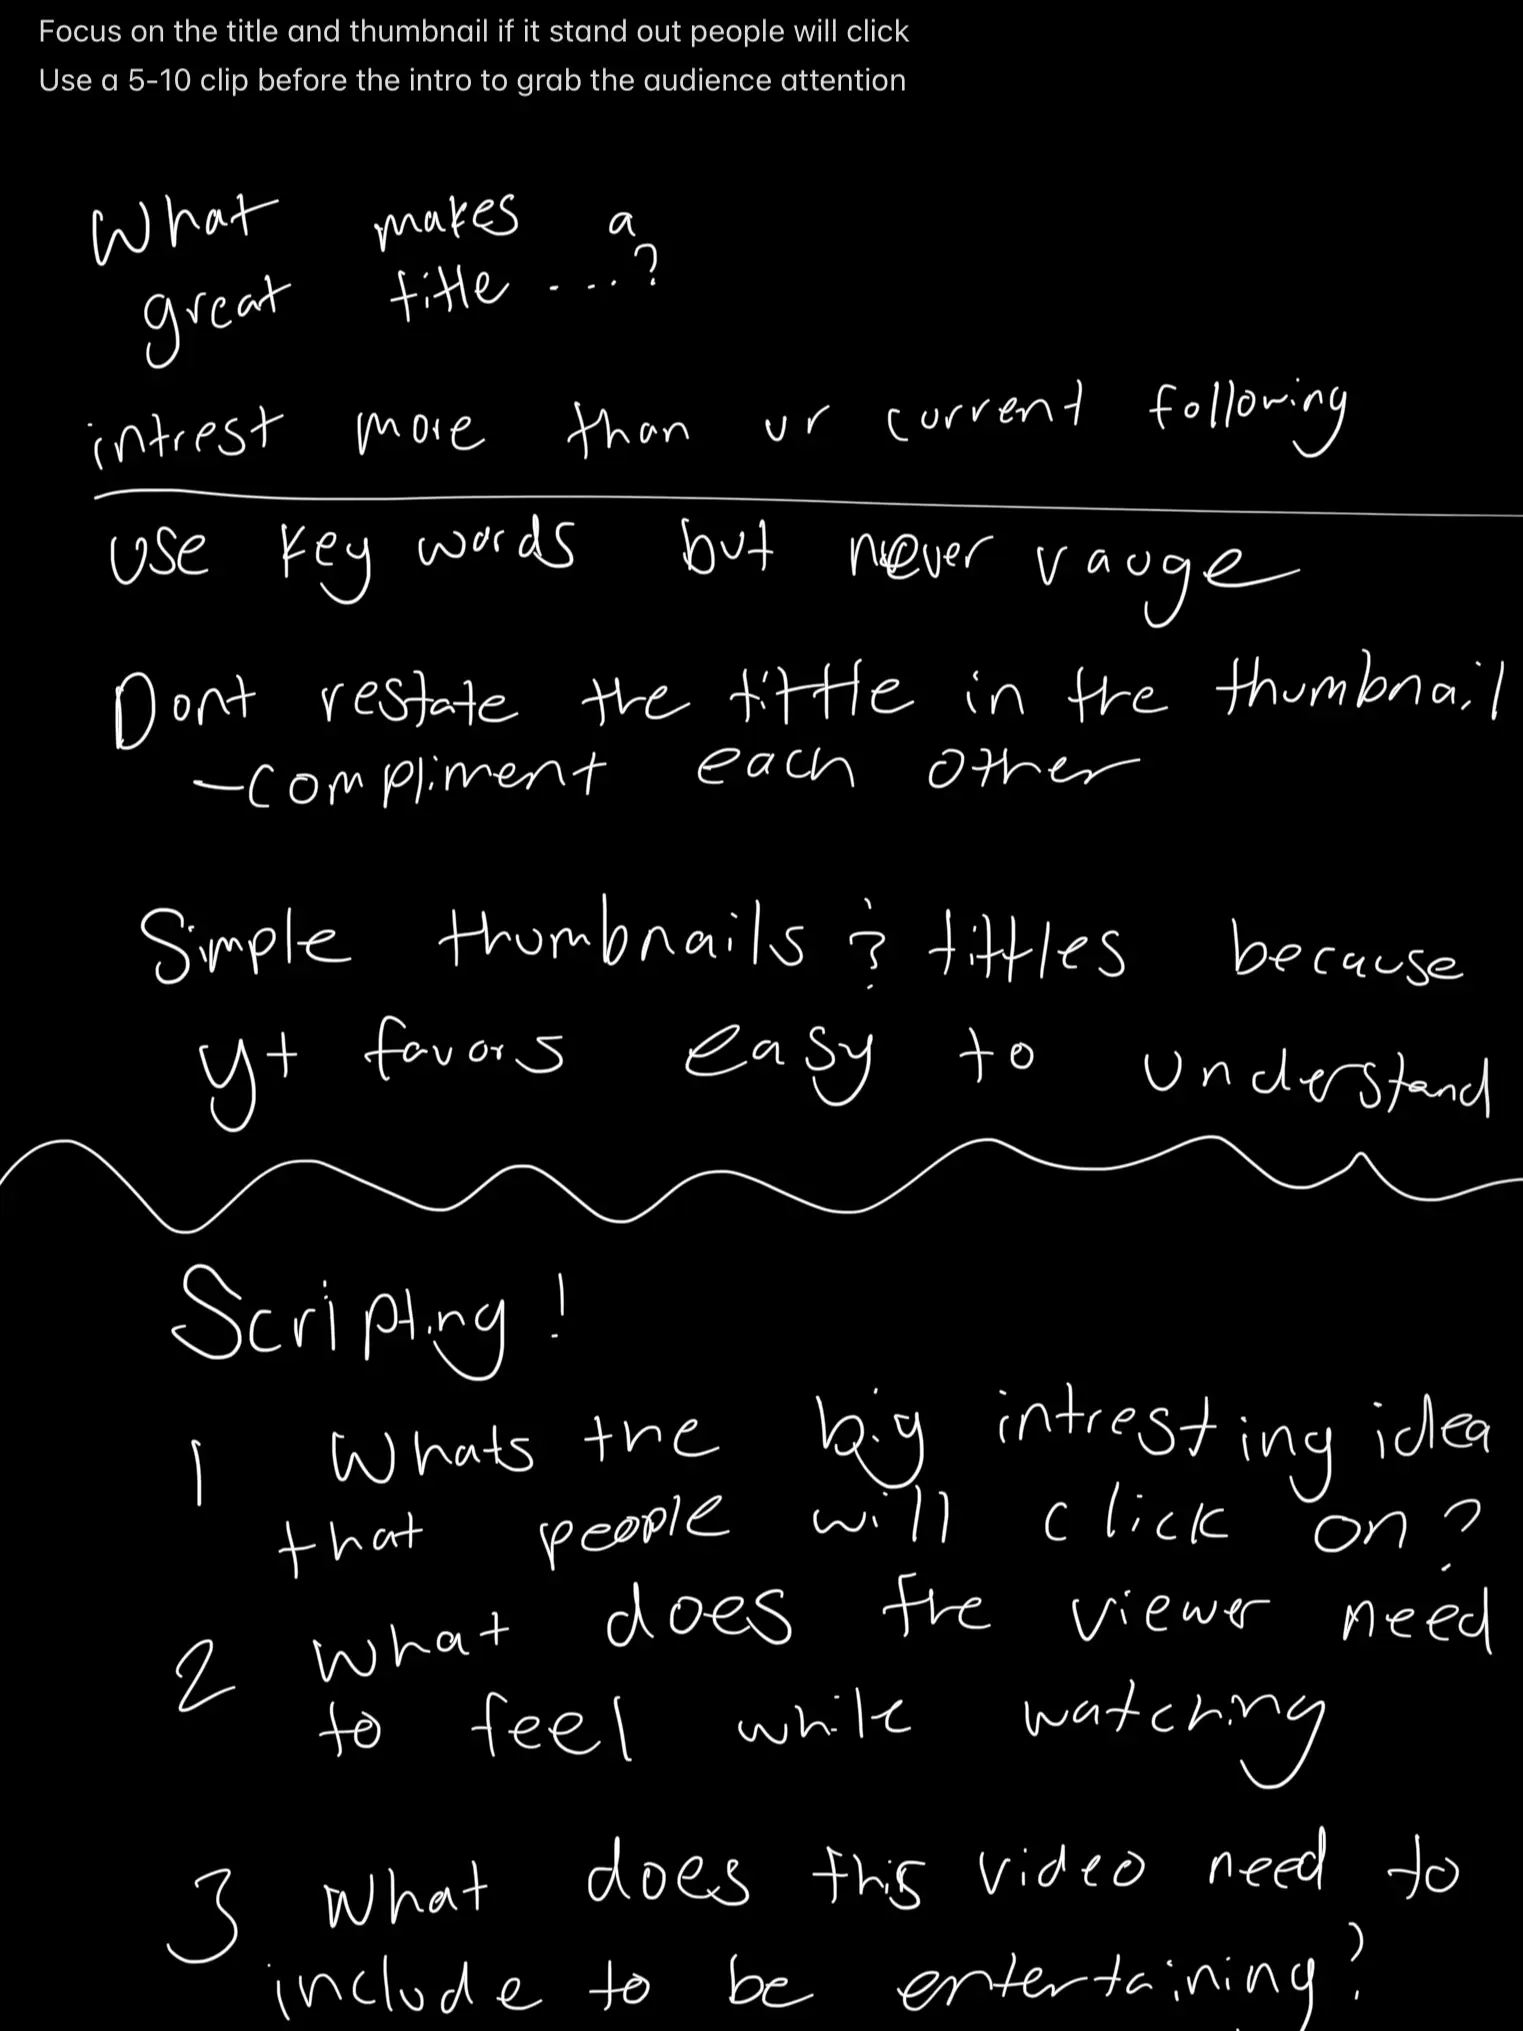  A handwritten list of ideas for a video that is entertaining.